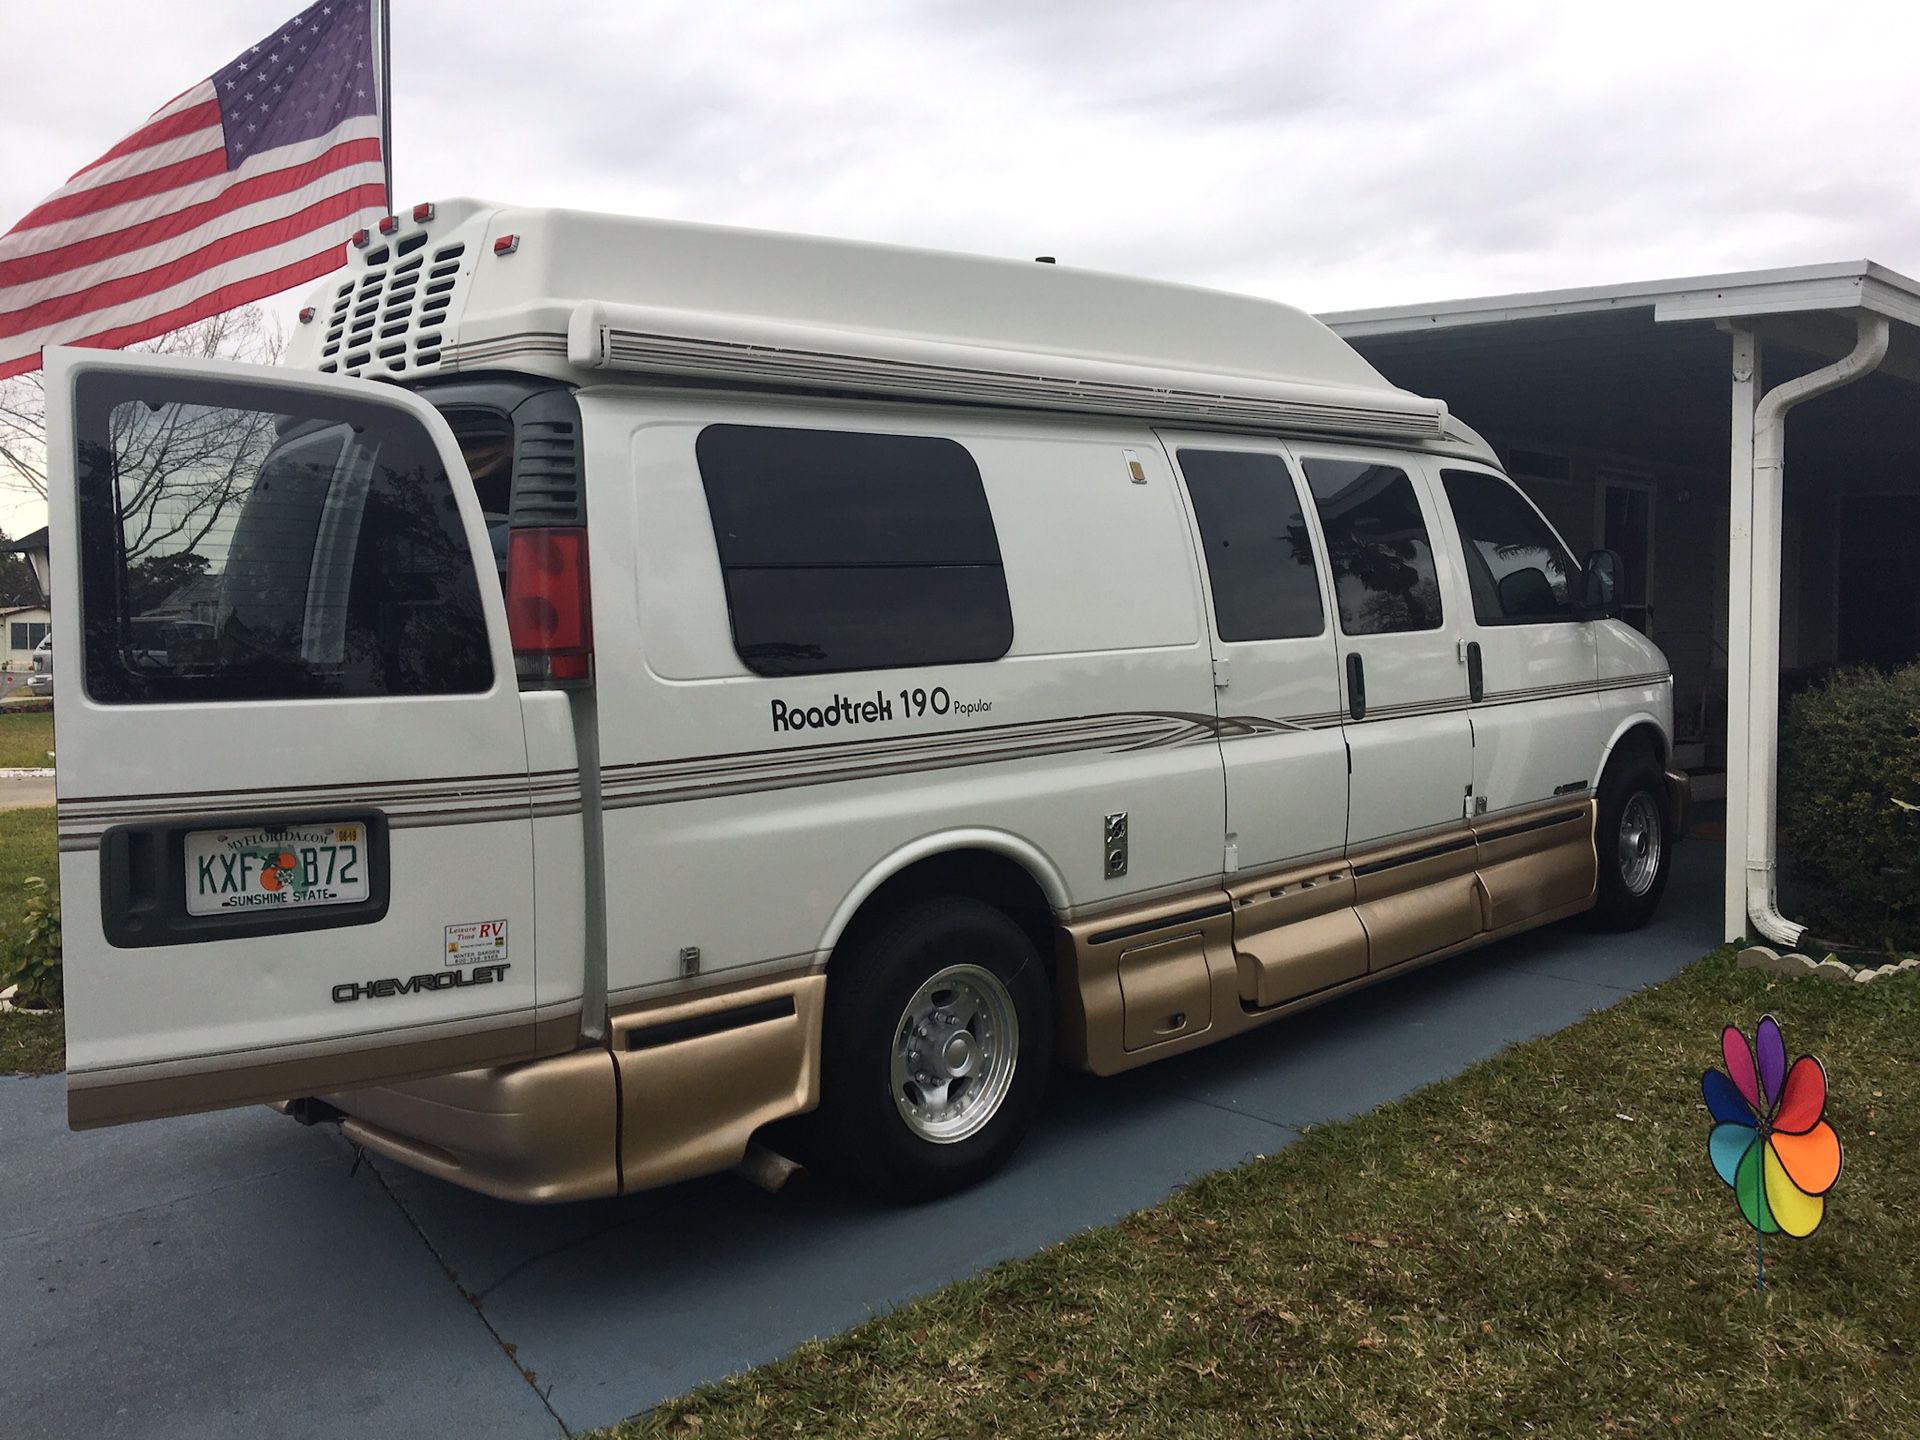 RV Conversion van, all the bells and whistles. Miles only 120,000 on 350 vantech engine. New Michelin 8 ply tires, new brakes and shocks. Is a 190